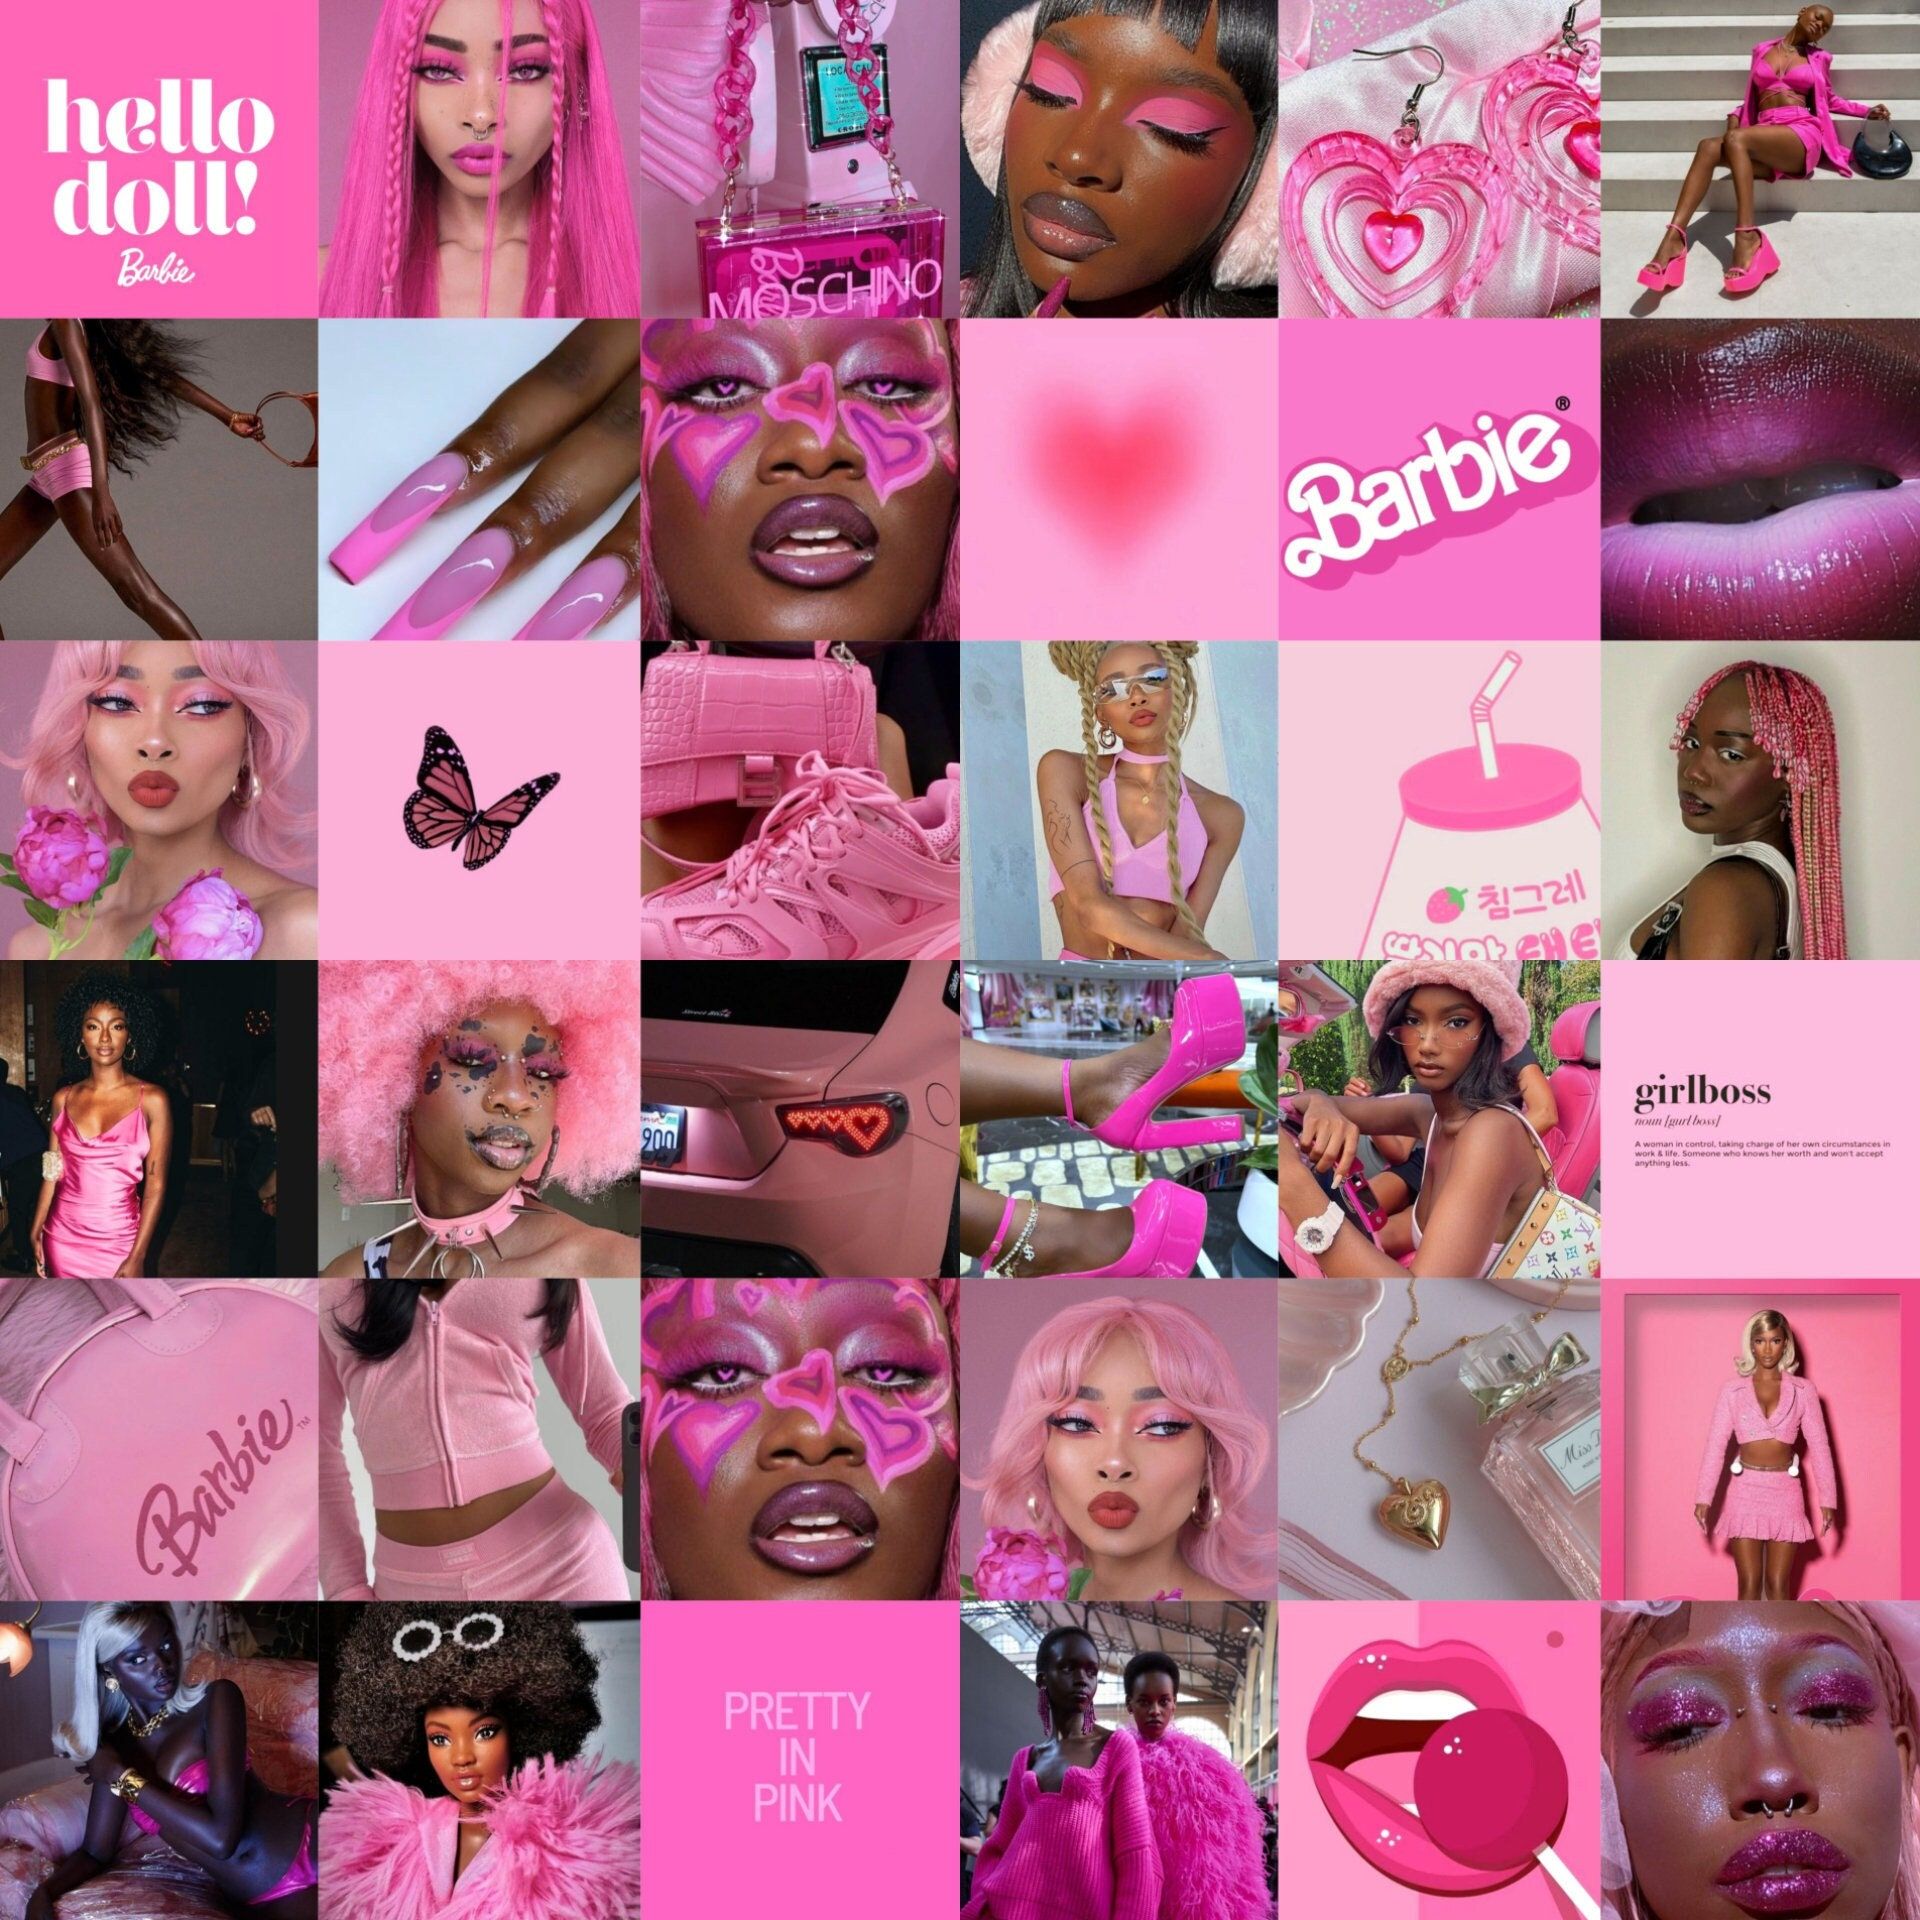 A collage of pink aesthetic images including Barbies, lips, and hair. - Pink collage, cute pink